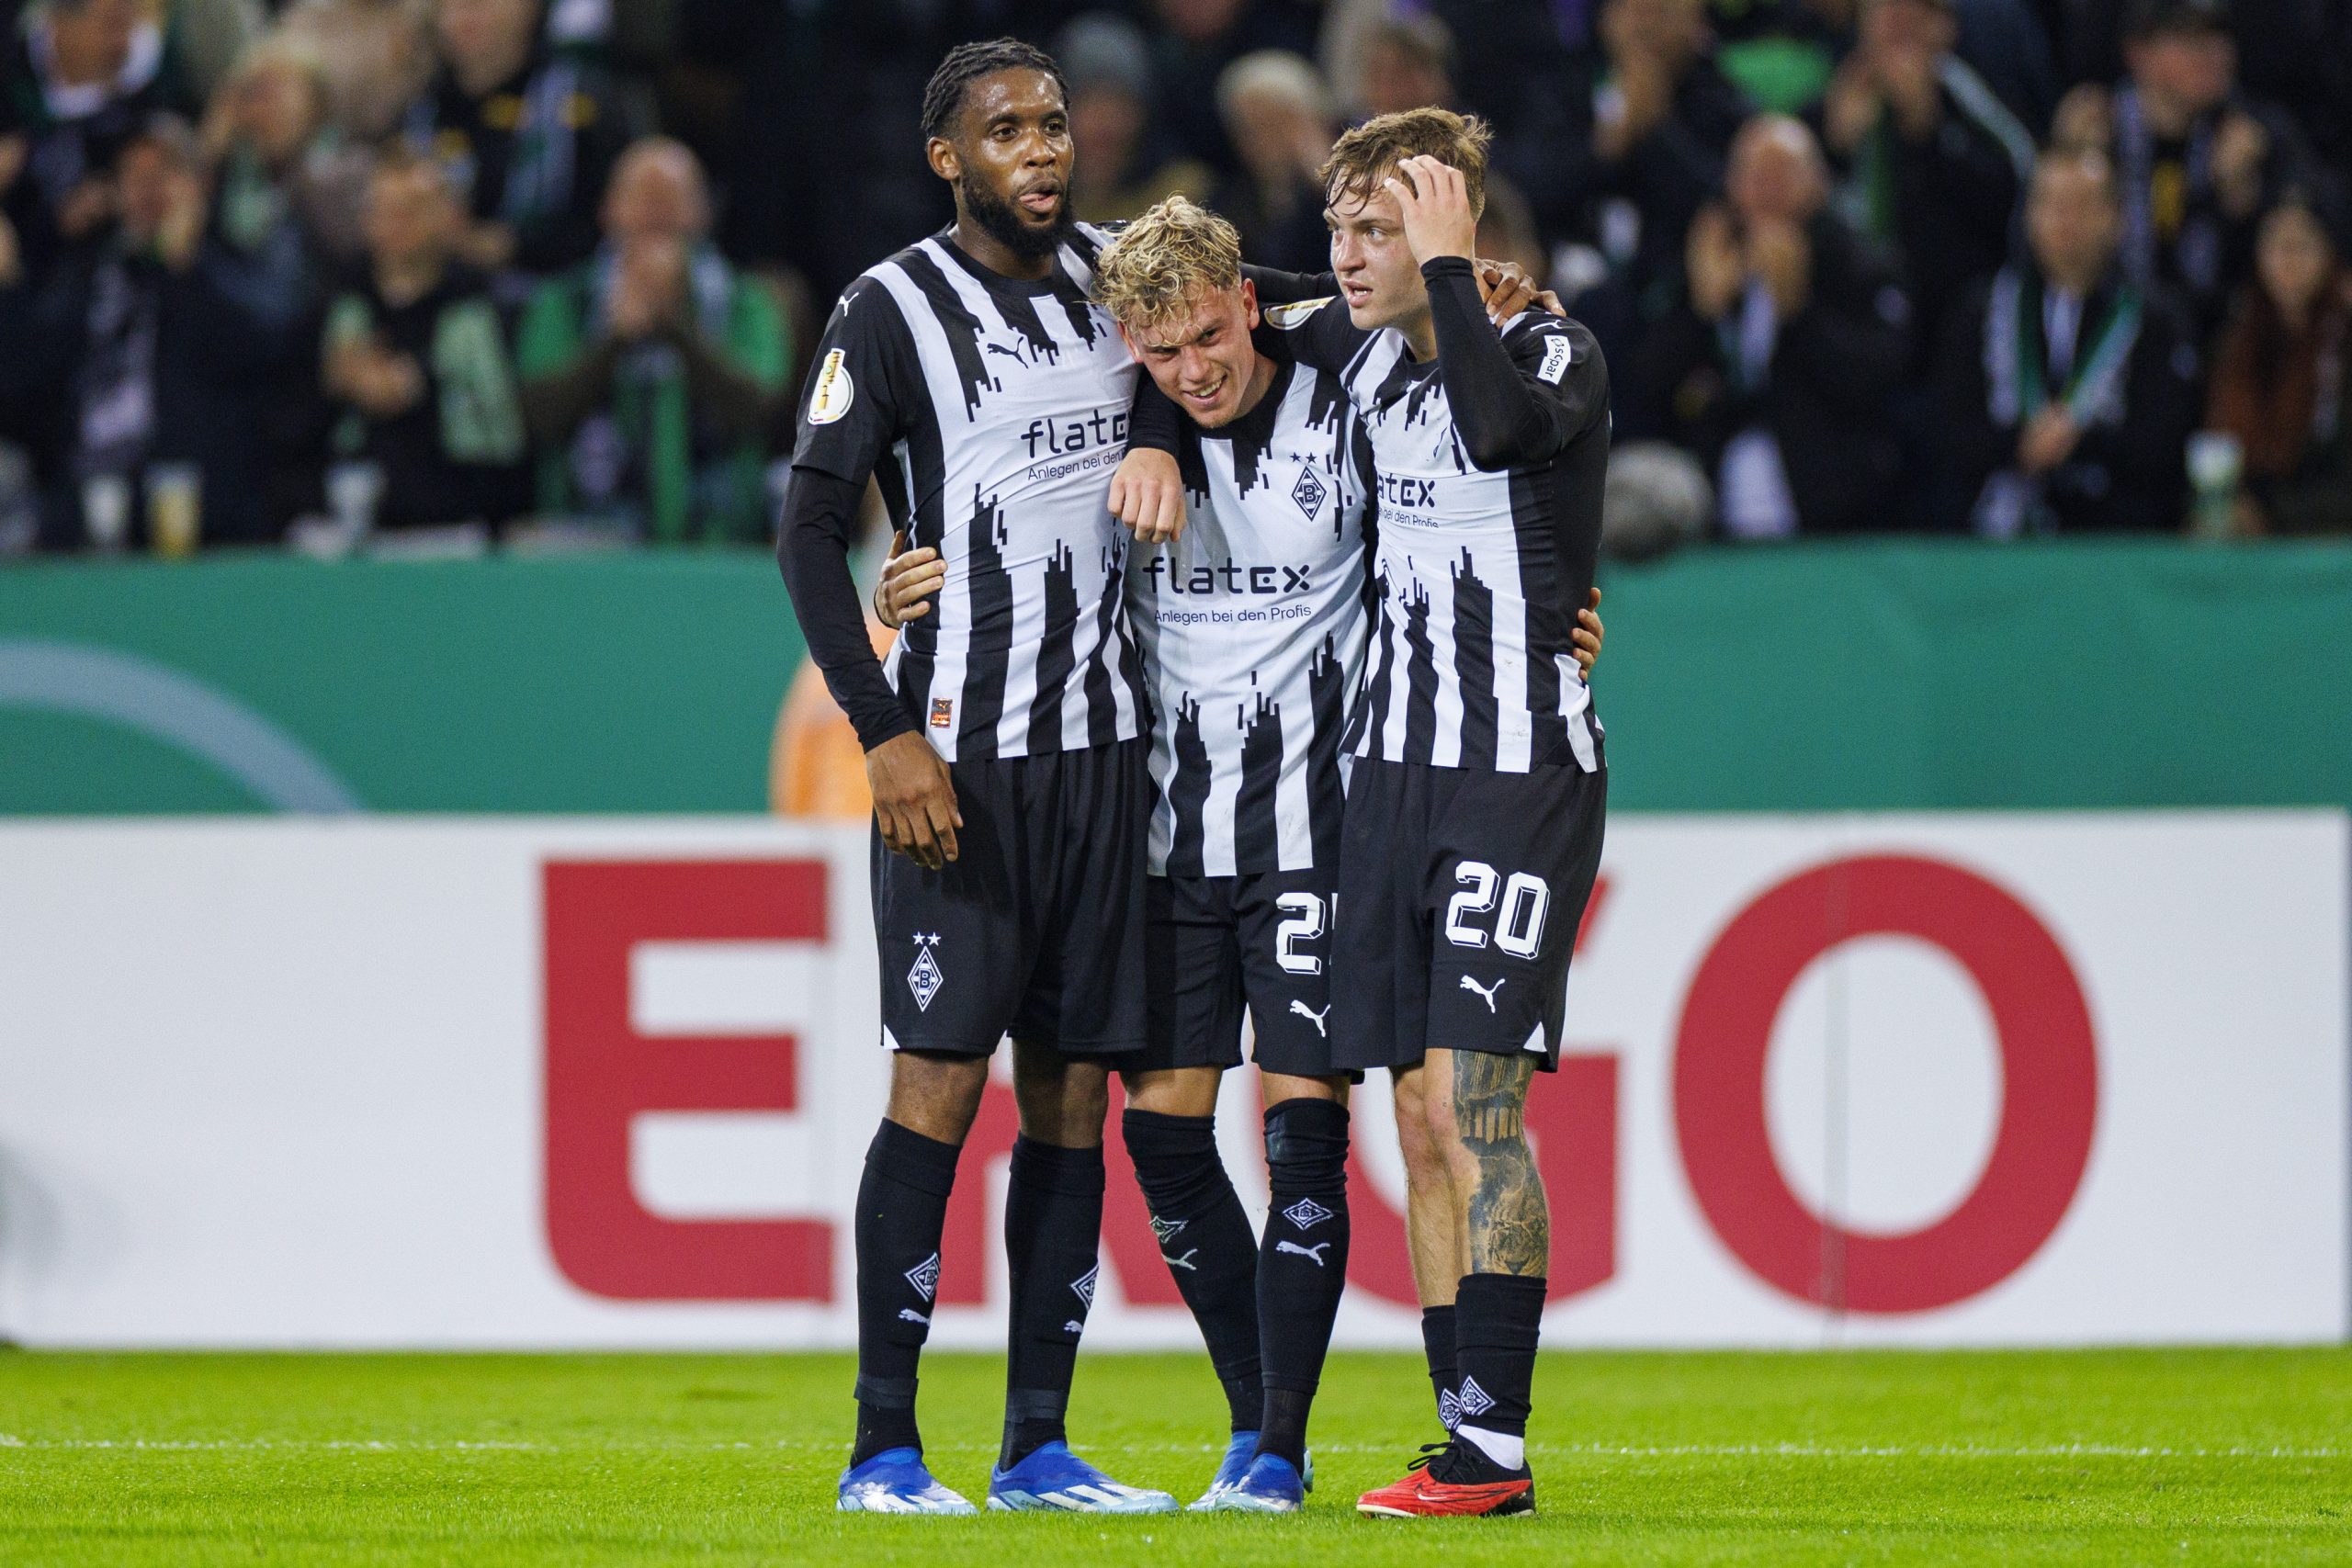 epa10951522 Moenchengladbach's Robin Hack (C) celebrates with teammates after scoring the 3-0 goal in the German DFB Cup second round soccer match between Borussia Moenchengladbach and 1.FC Heidenheim in Moenchengladbach, Germany, 31 October 2023.  EPA/Christopher Neundorf CONDITIONS - ATTENTION: The DFB regulations prohibit any use of photographs as image sequences and/or quasi-video.